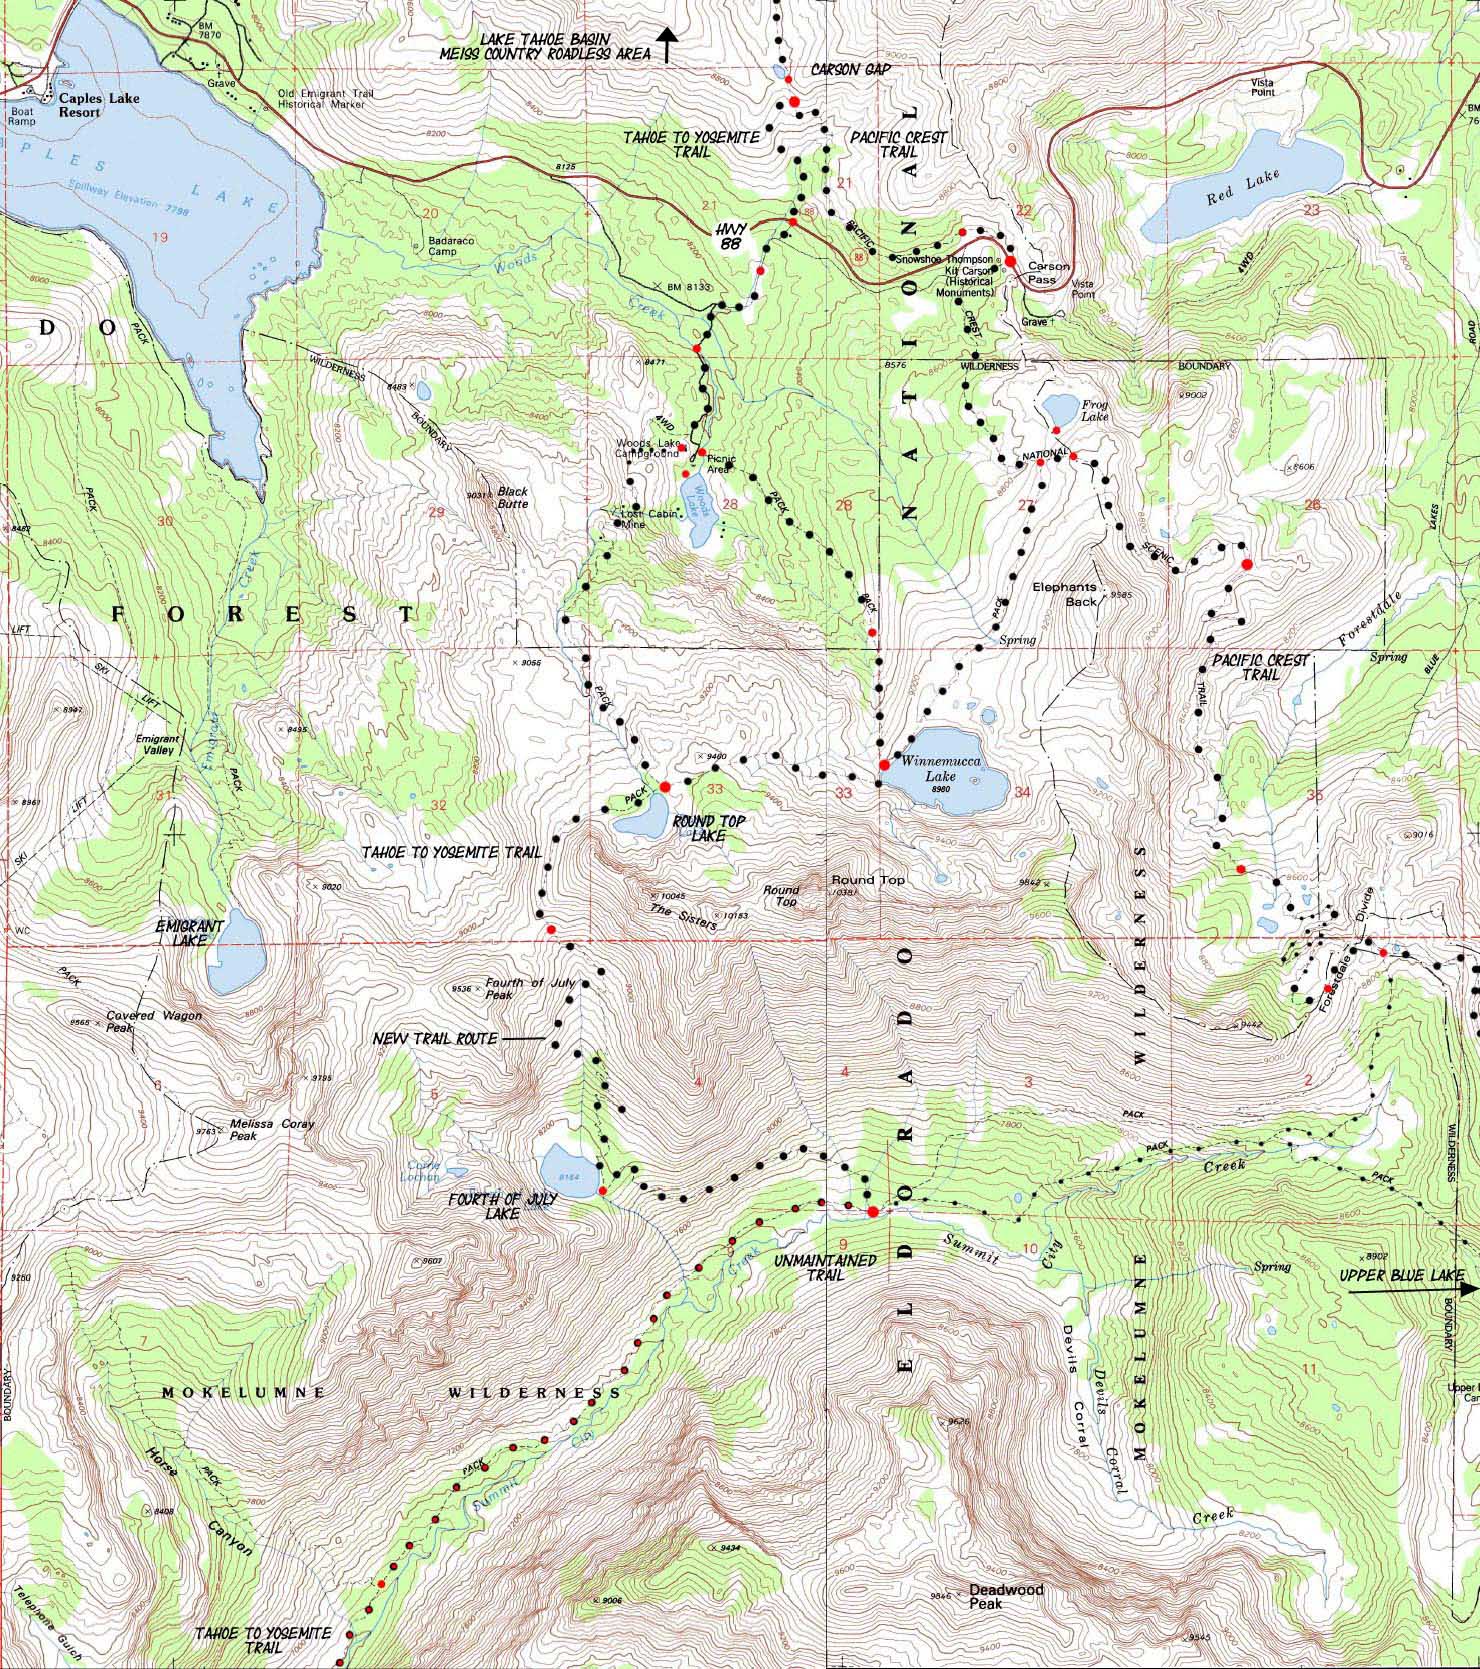 Carson Pass Management Area, TYT-PCT topo hiking map.